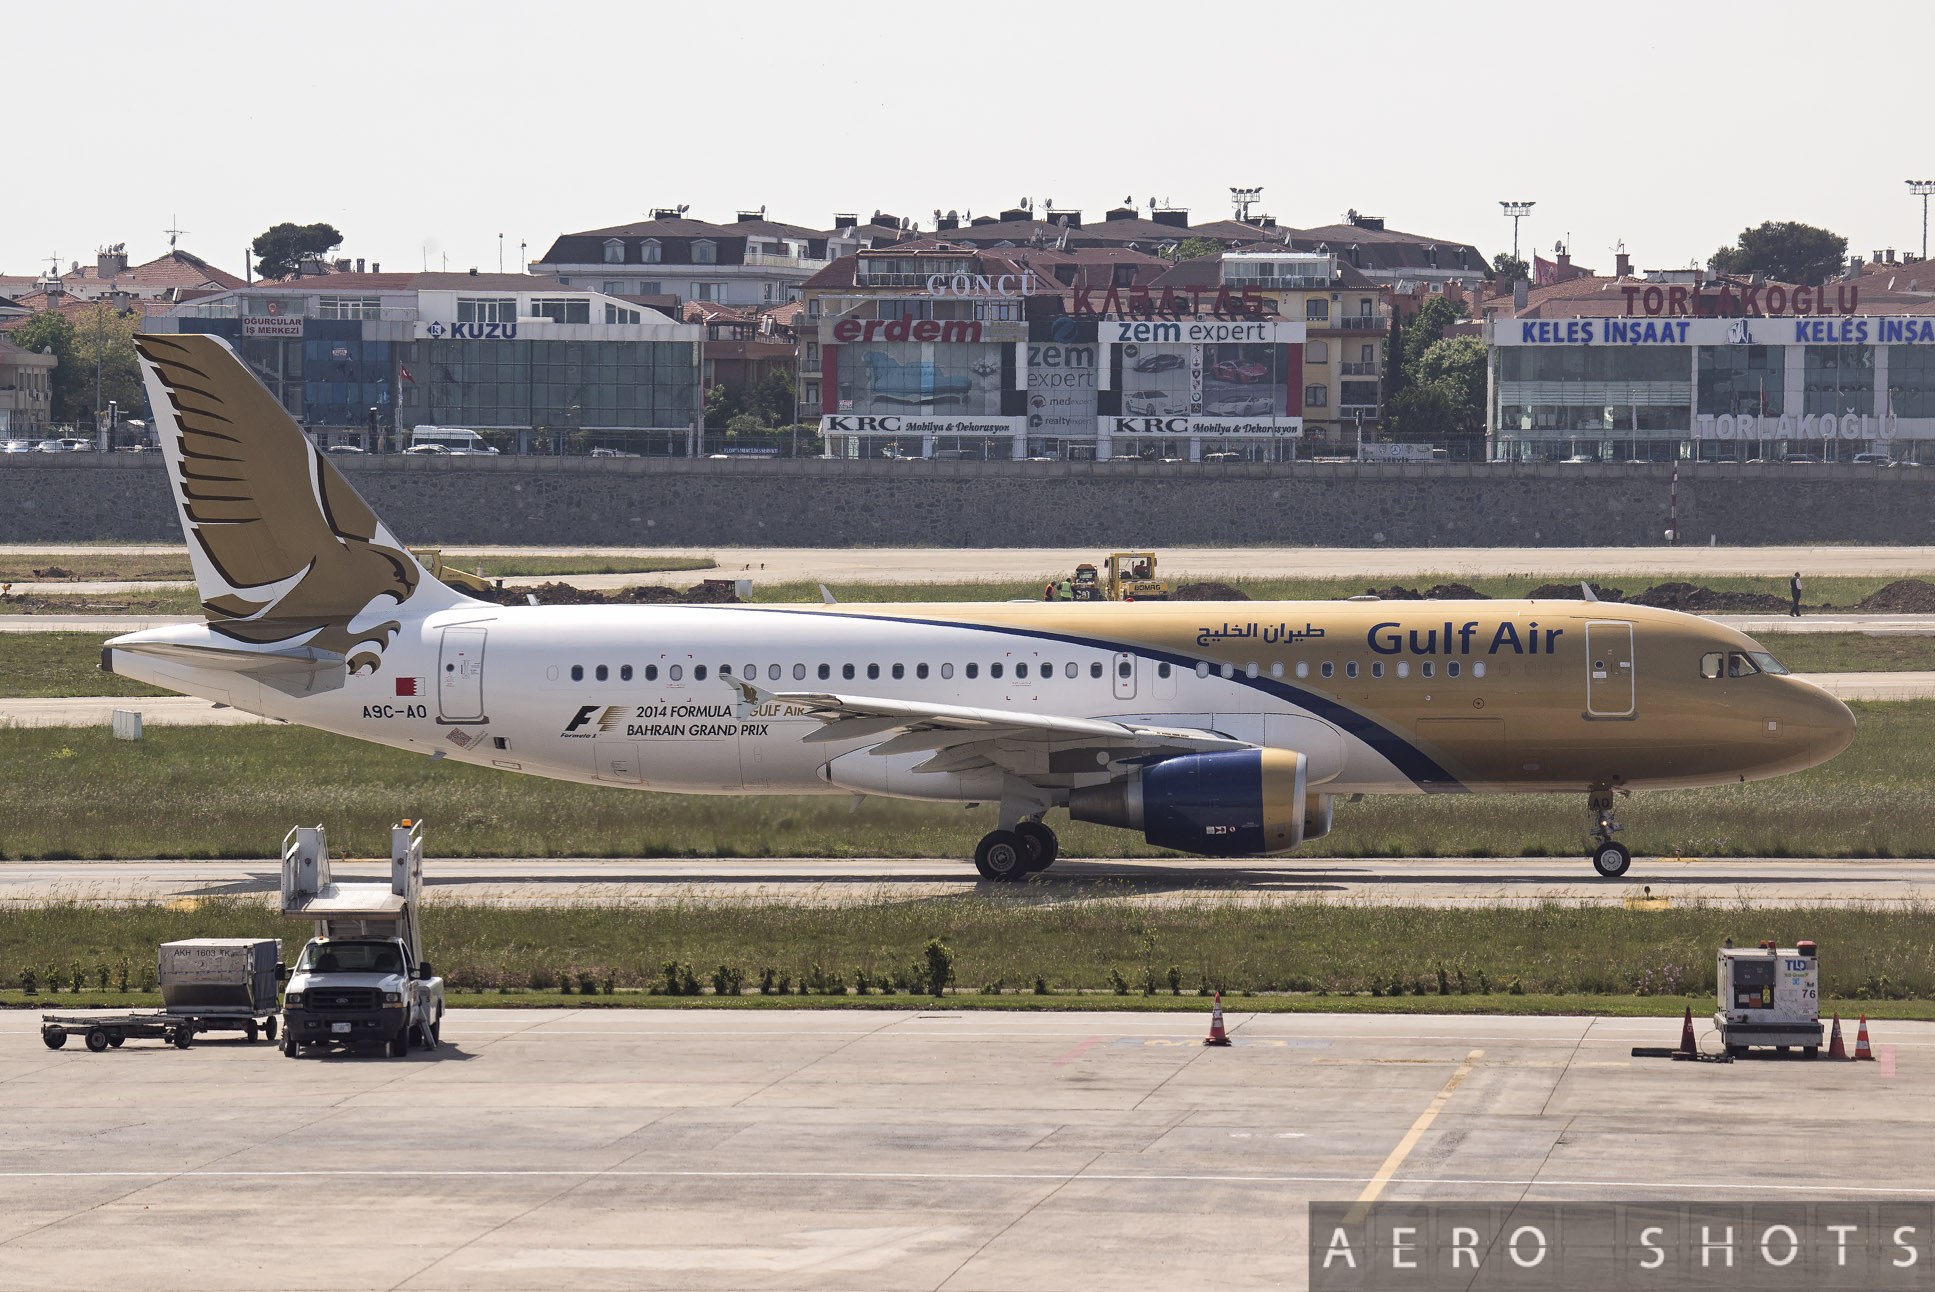 A9C-A0 in Istanbul (IST)